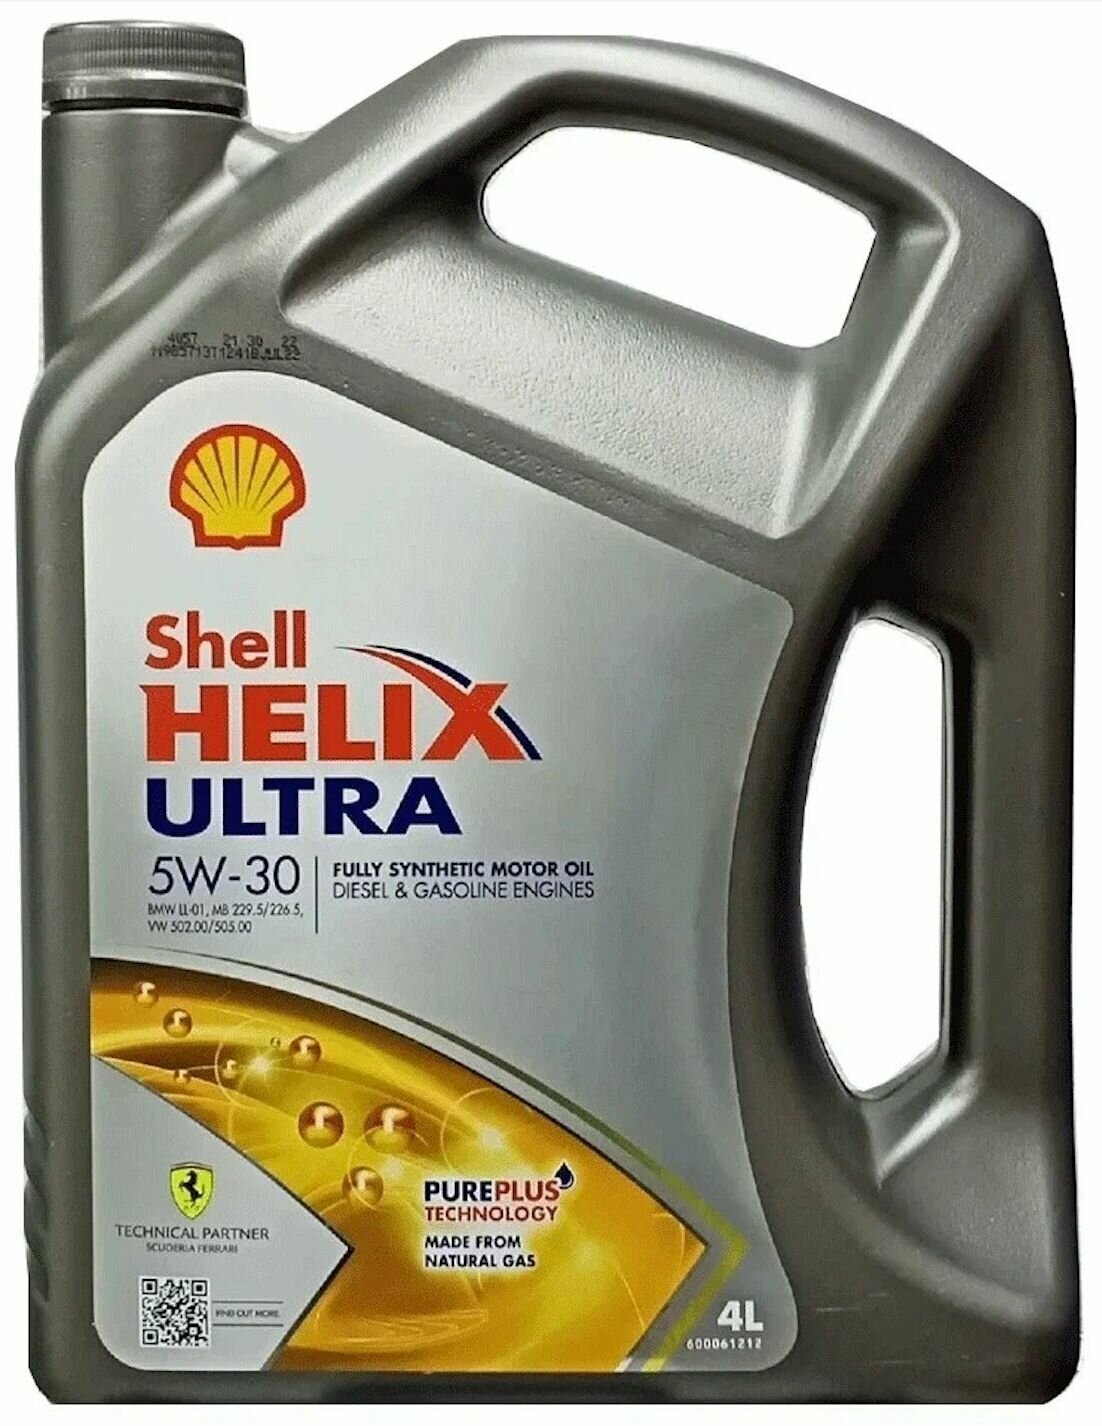 Shell Масло моторное Shell Helix Ultra ECT C3 5W-30, 4 л 550042847